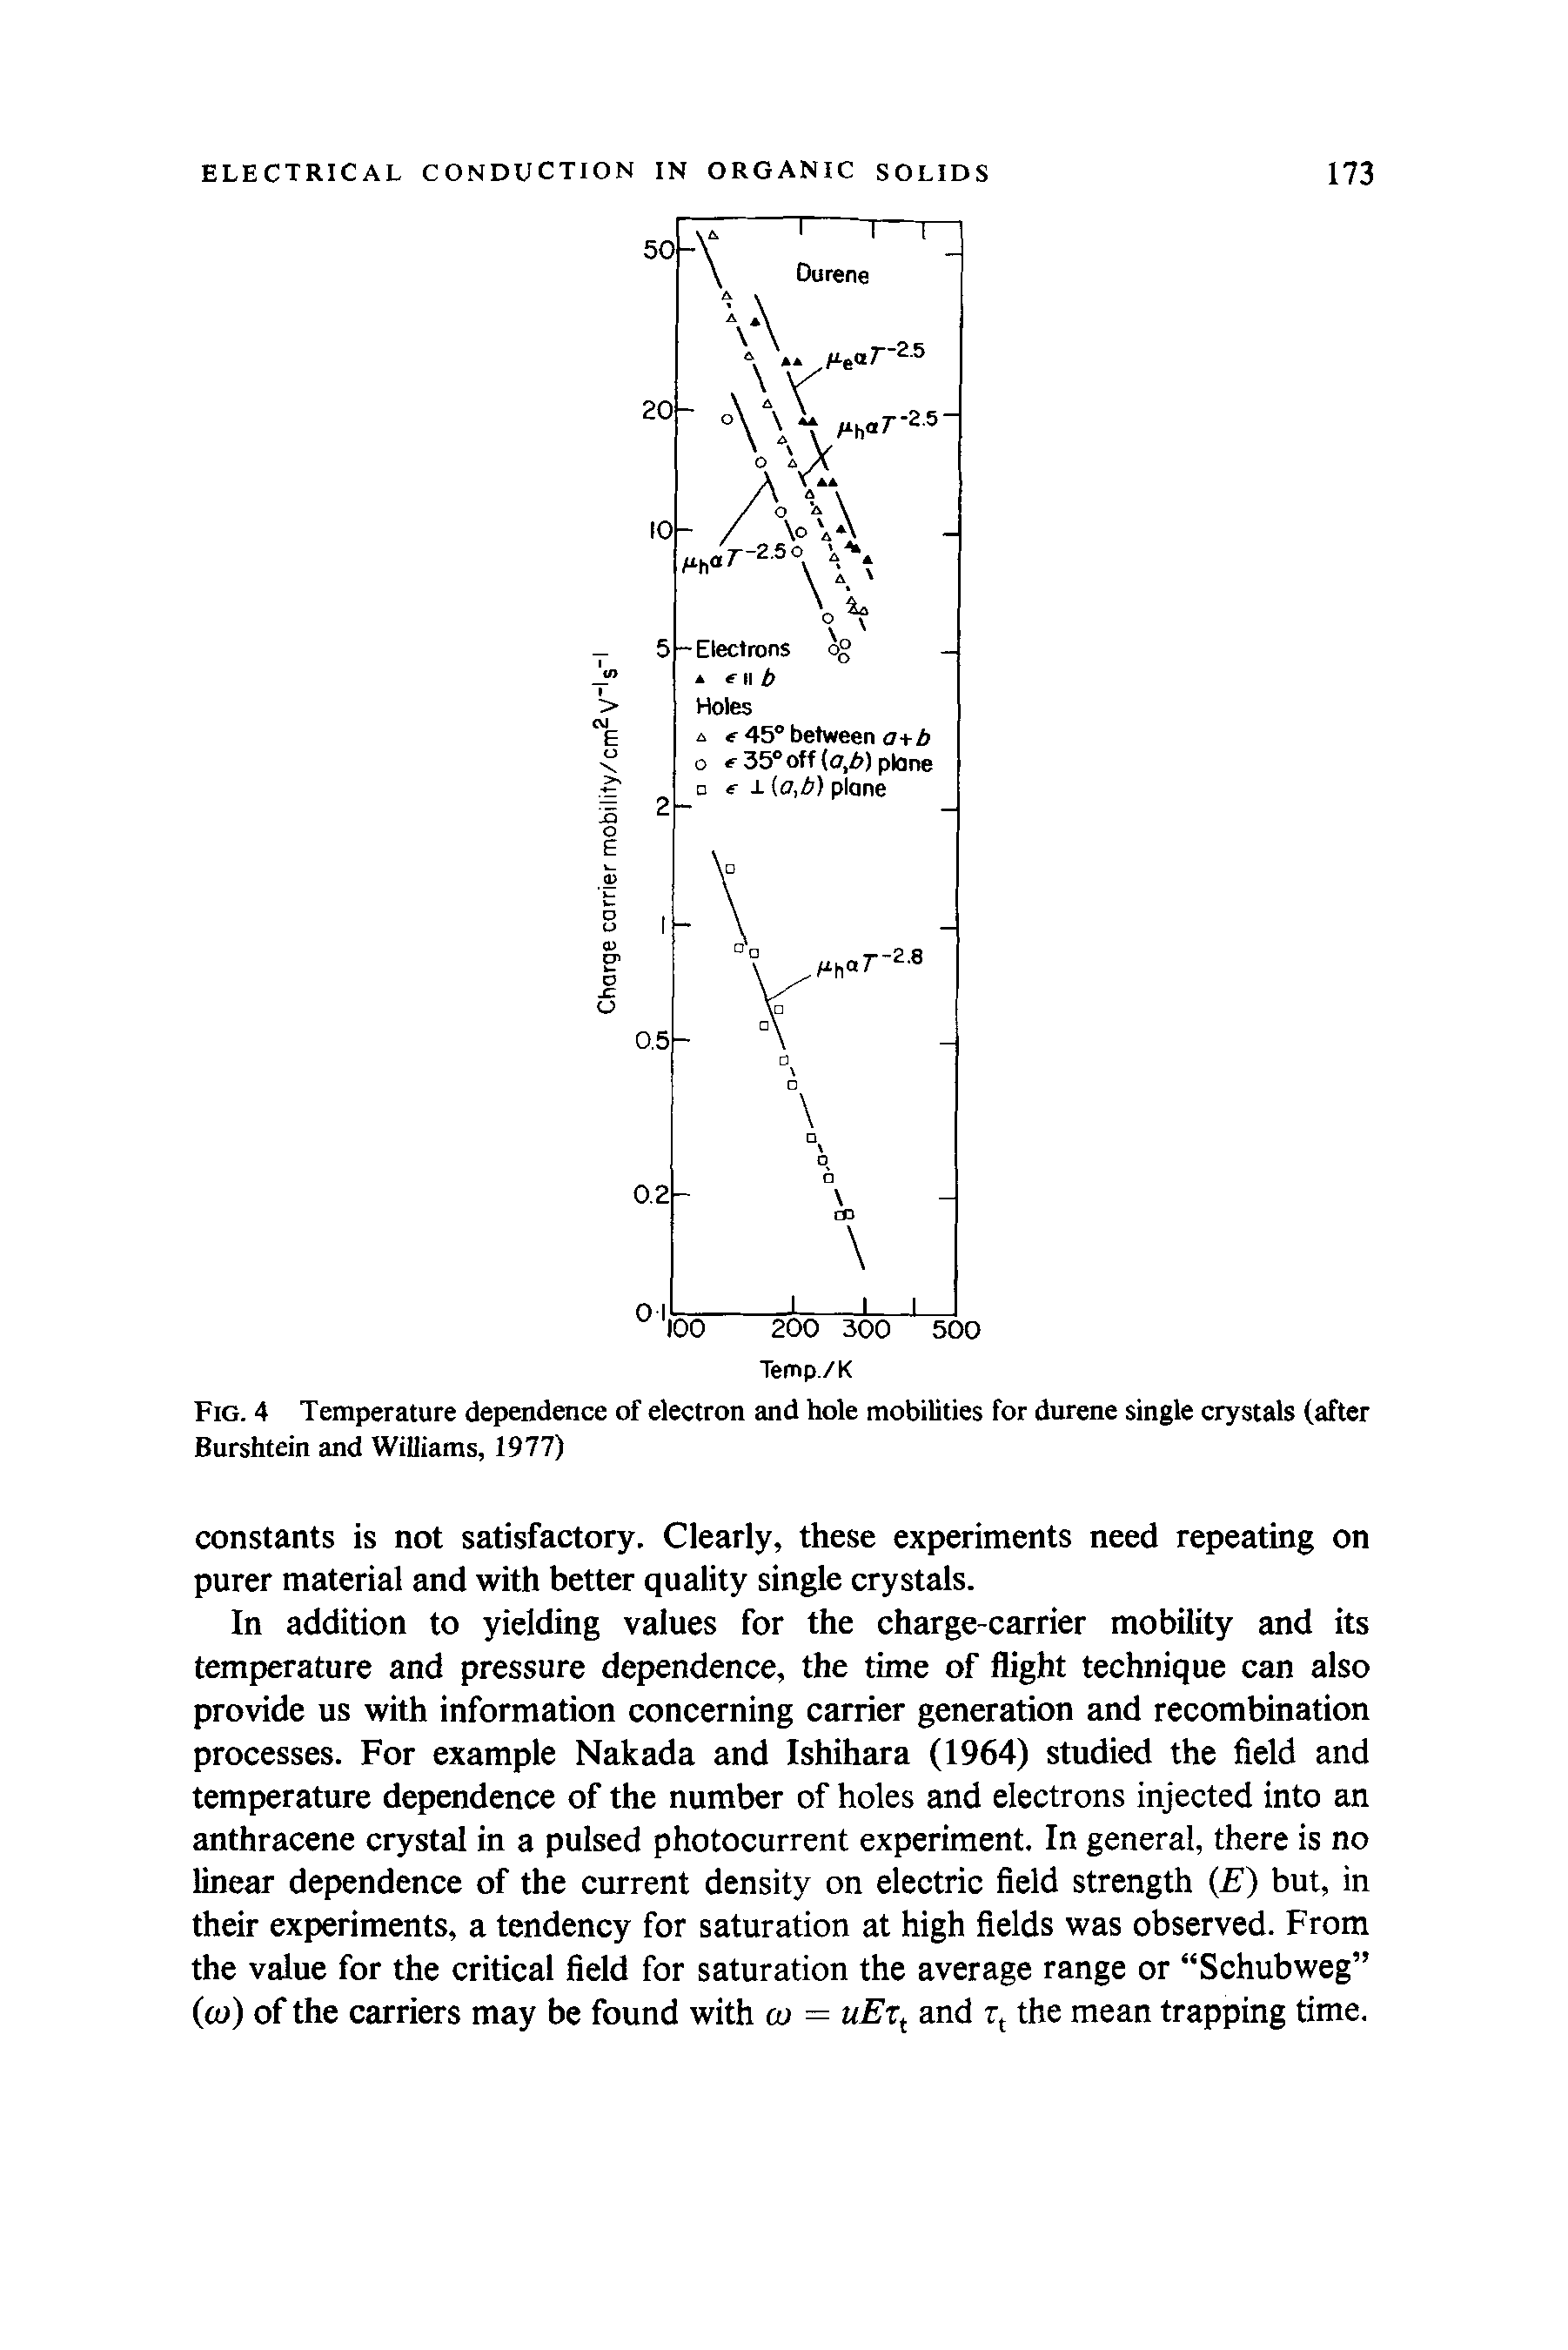 Fig. 4 Temperature dependence of electron and hole mobilities for durene single crystals (after Burshtein and Williams, 1977)...